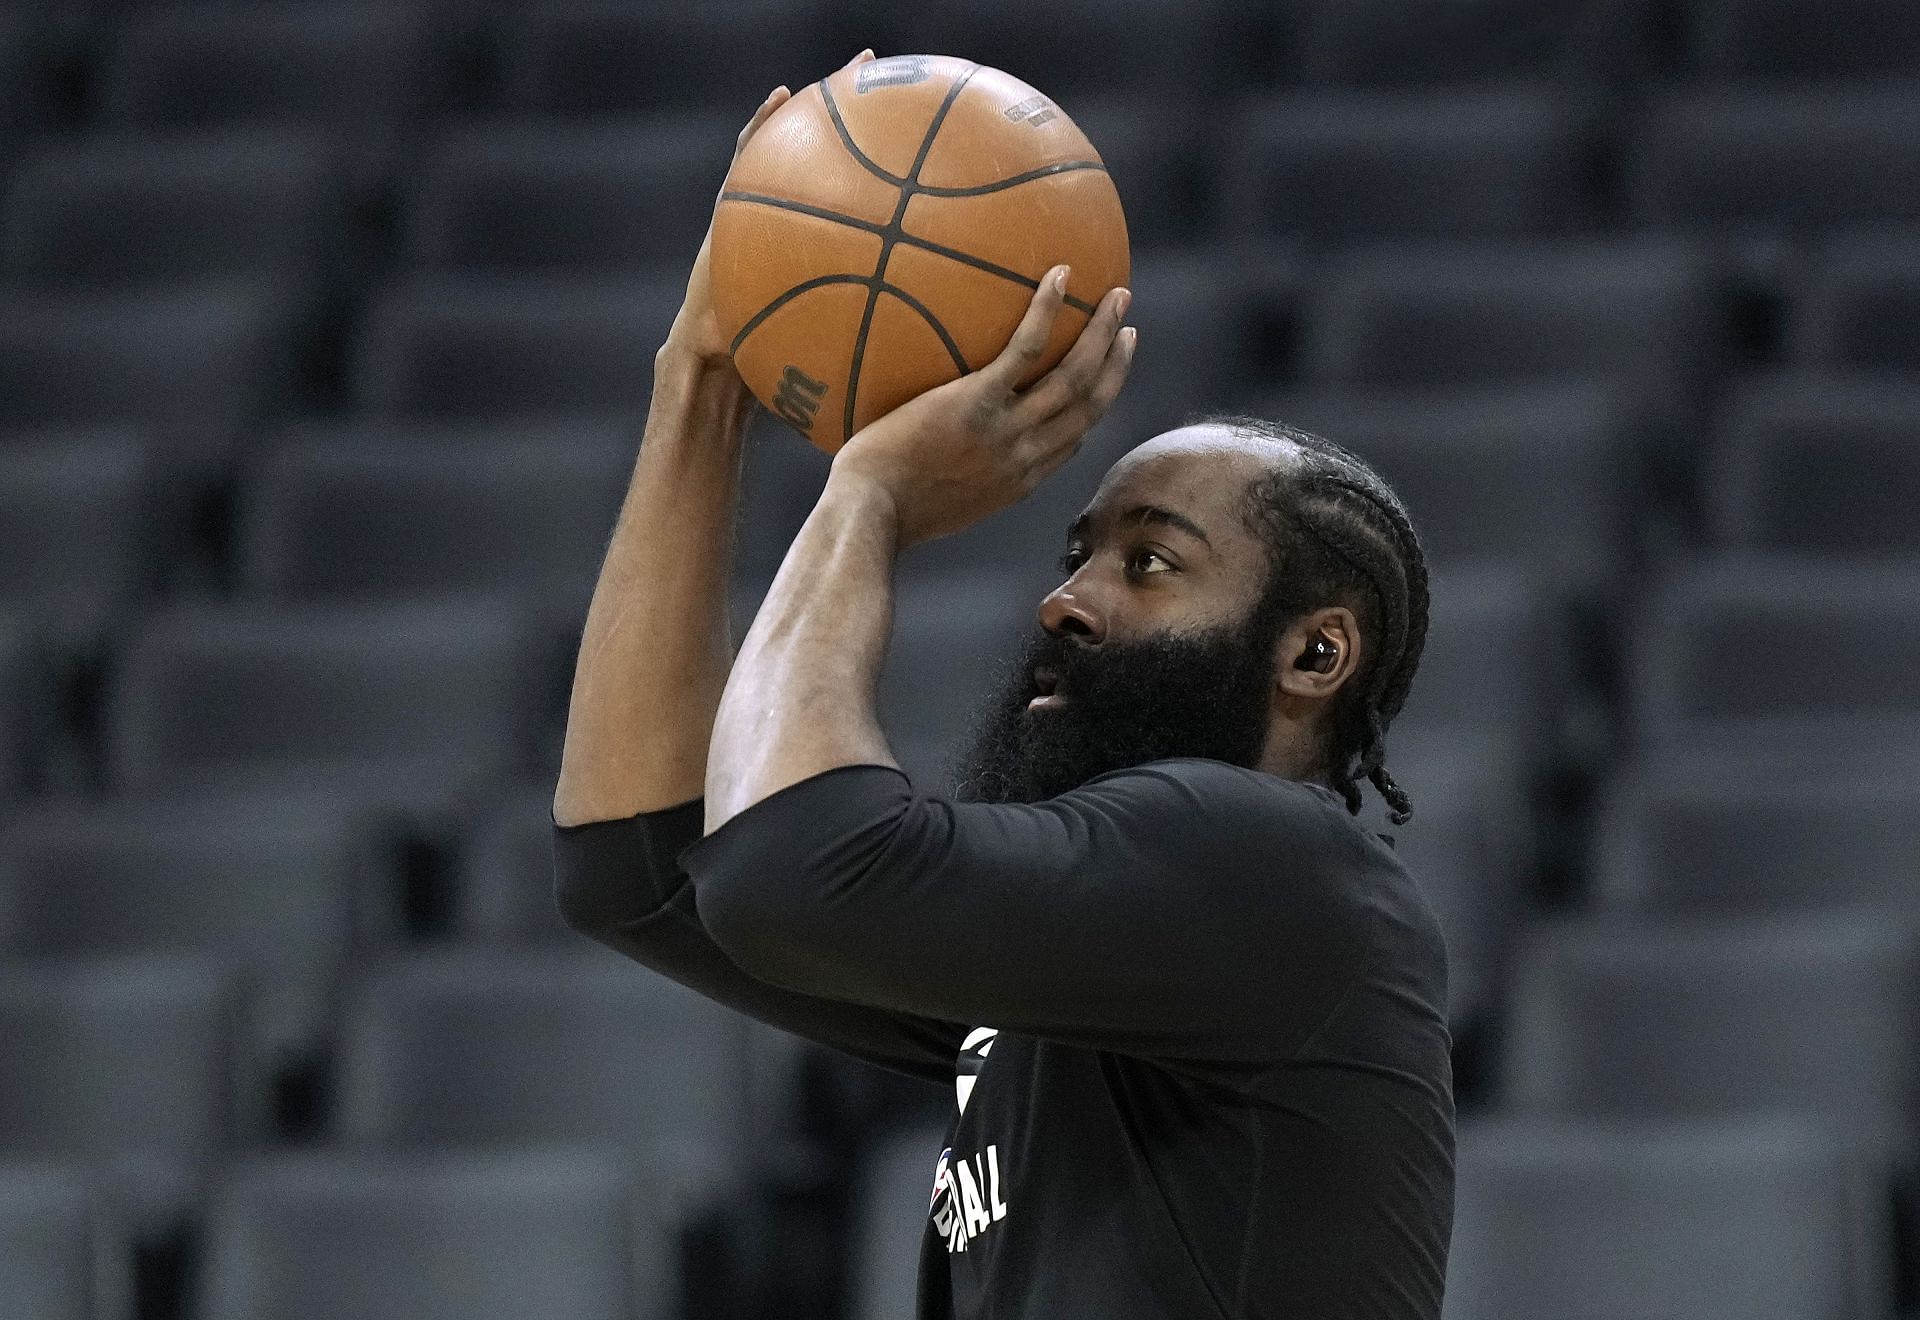 James Harden of the Brooklyn Nets warms up before the start of his game against the Sacramento Kings on Feb. 2 in Sacramento, California.